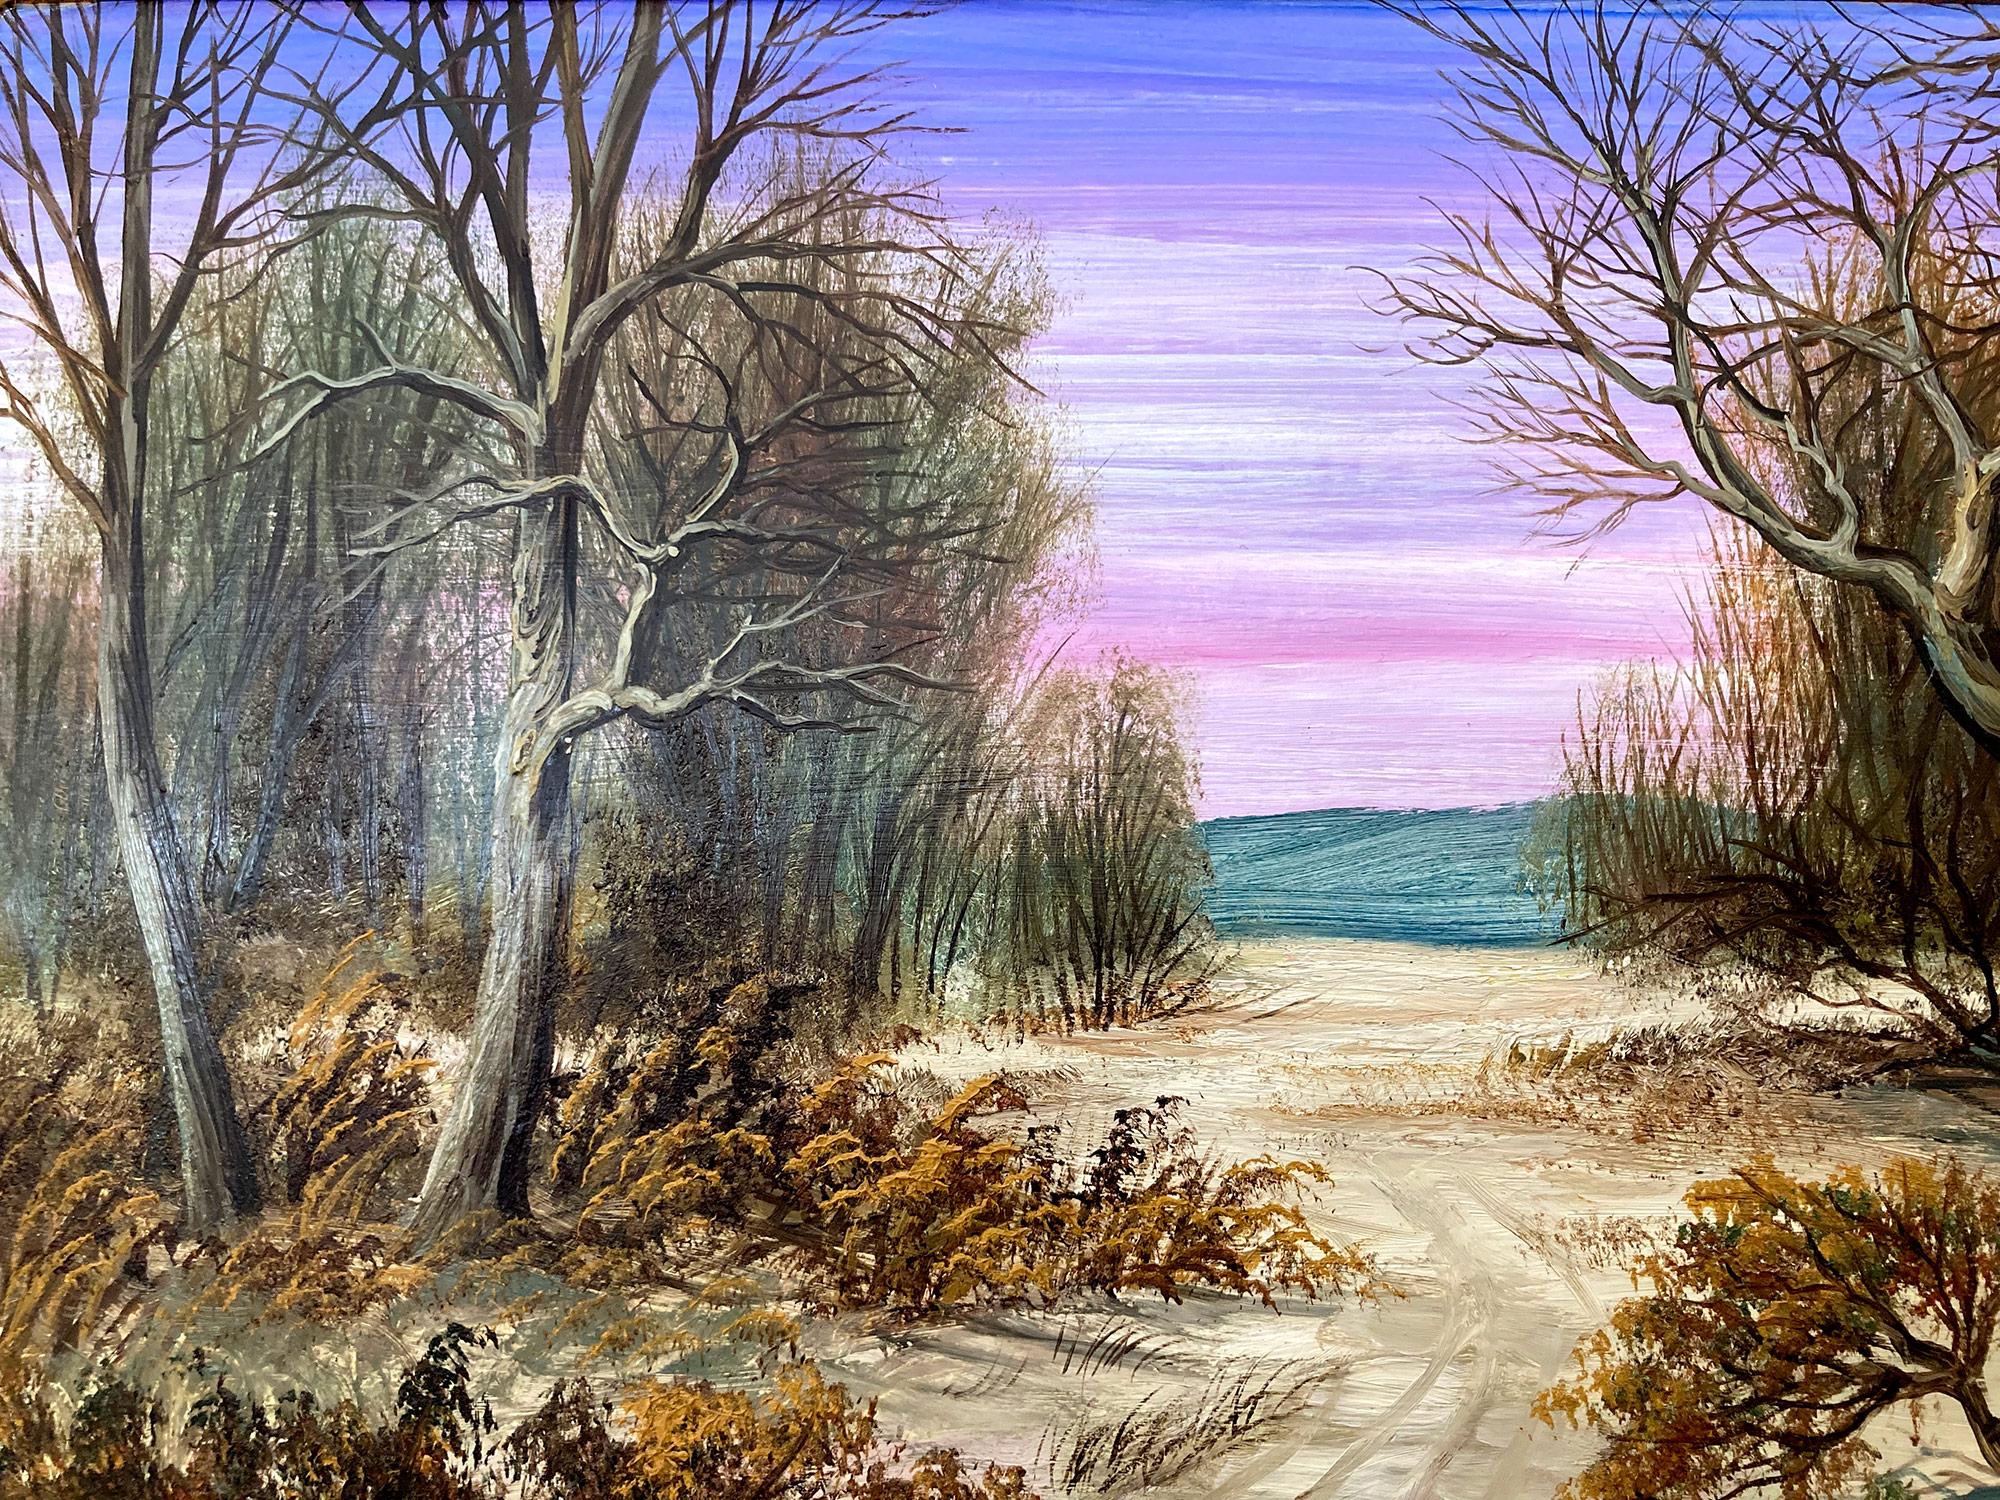 A fine depiction of a winter season by Palisade Mountain during twilight. For this wonderful depiction, Nemethy uses a fine technique which depicts the landscape and the pathway in a miniature way. With joyful colors, this piece is bright and